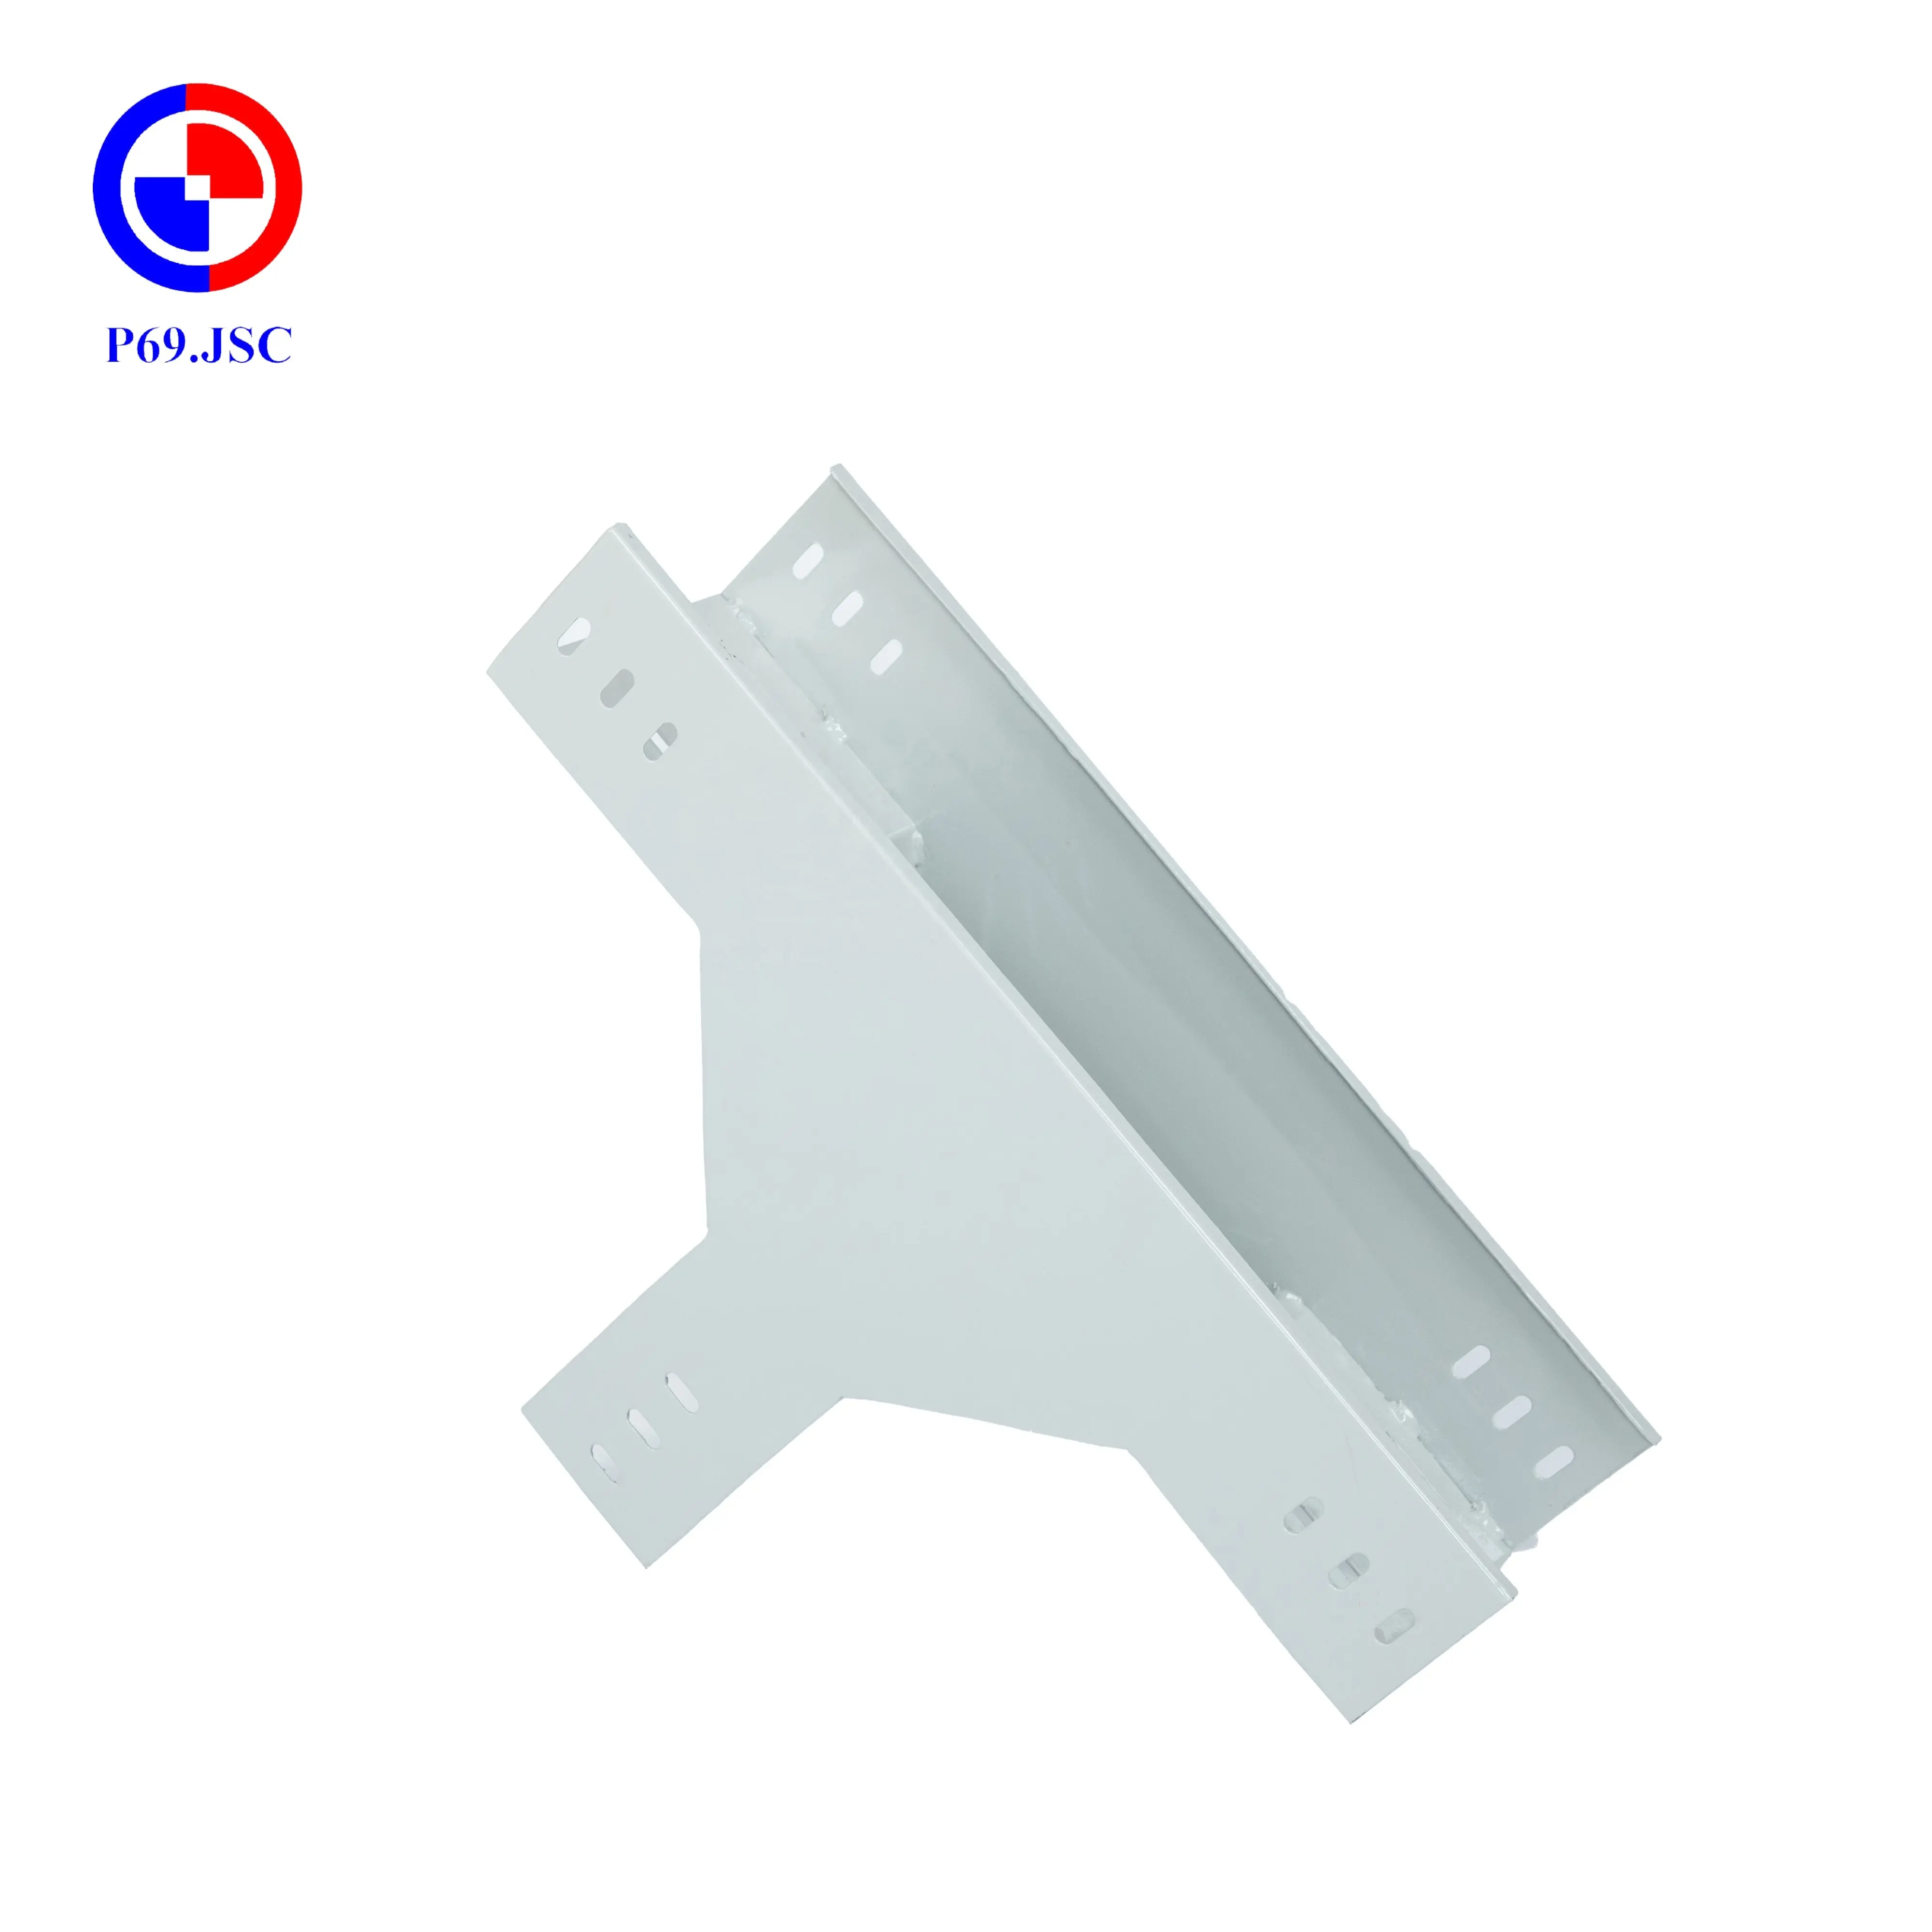 Downward T-Part Cable Tray Accessories Easy To Install Aging Resistant Protect Wires High Quality OEM Powder Coating P69